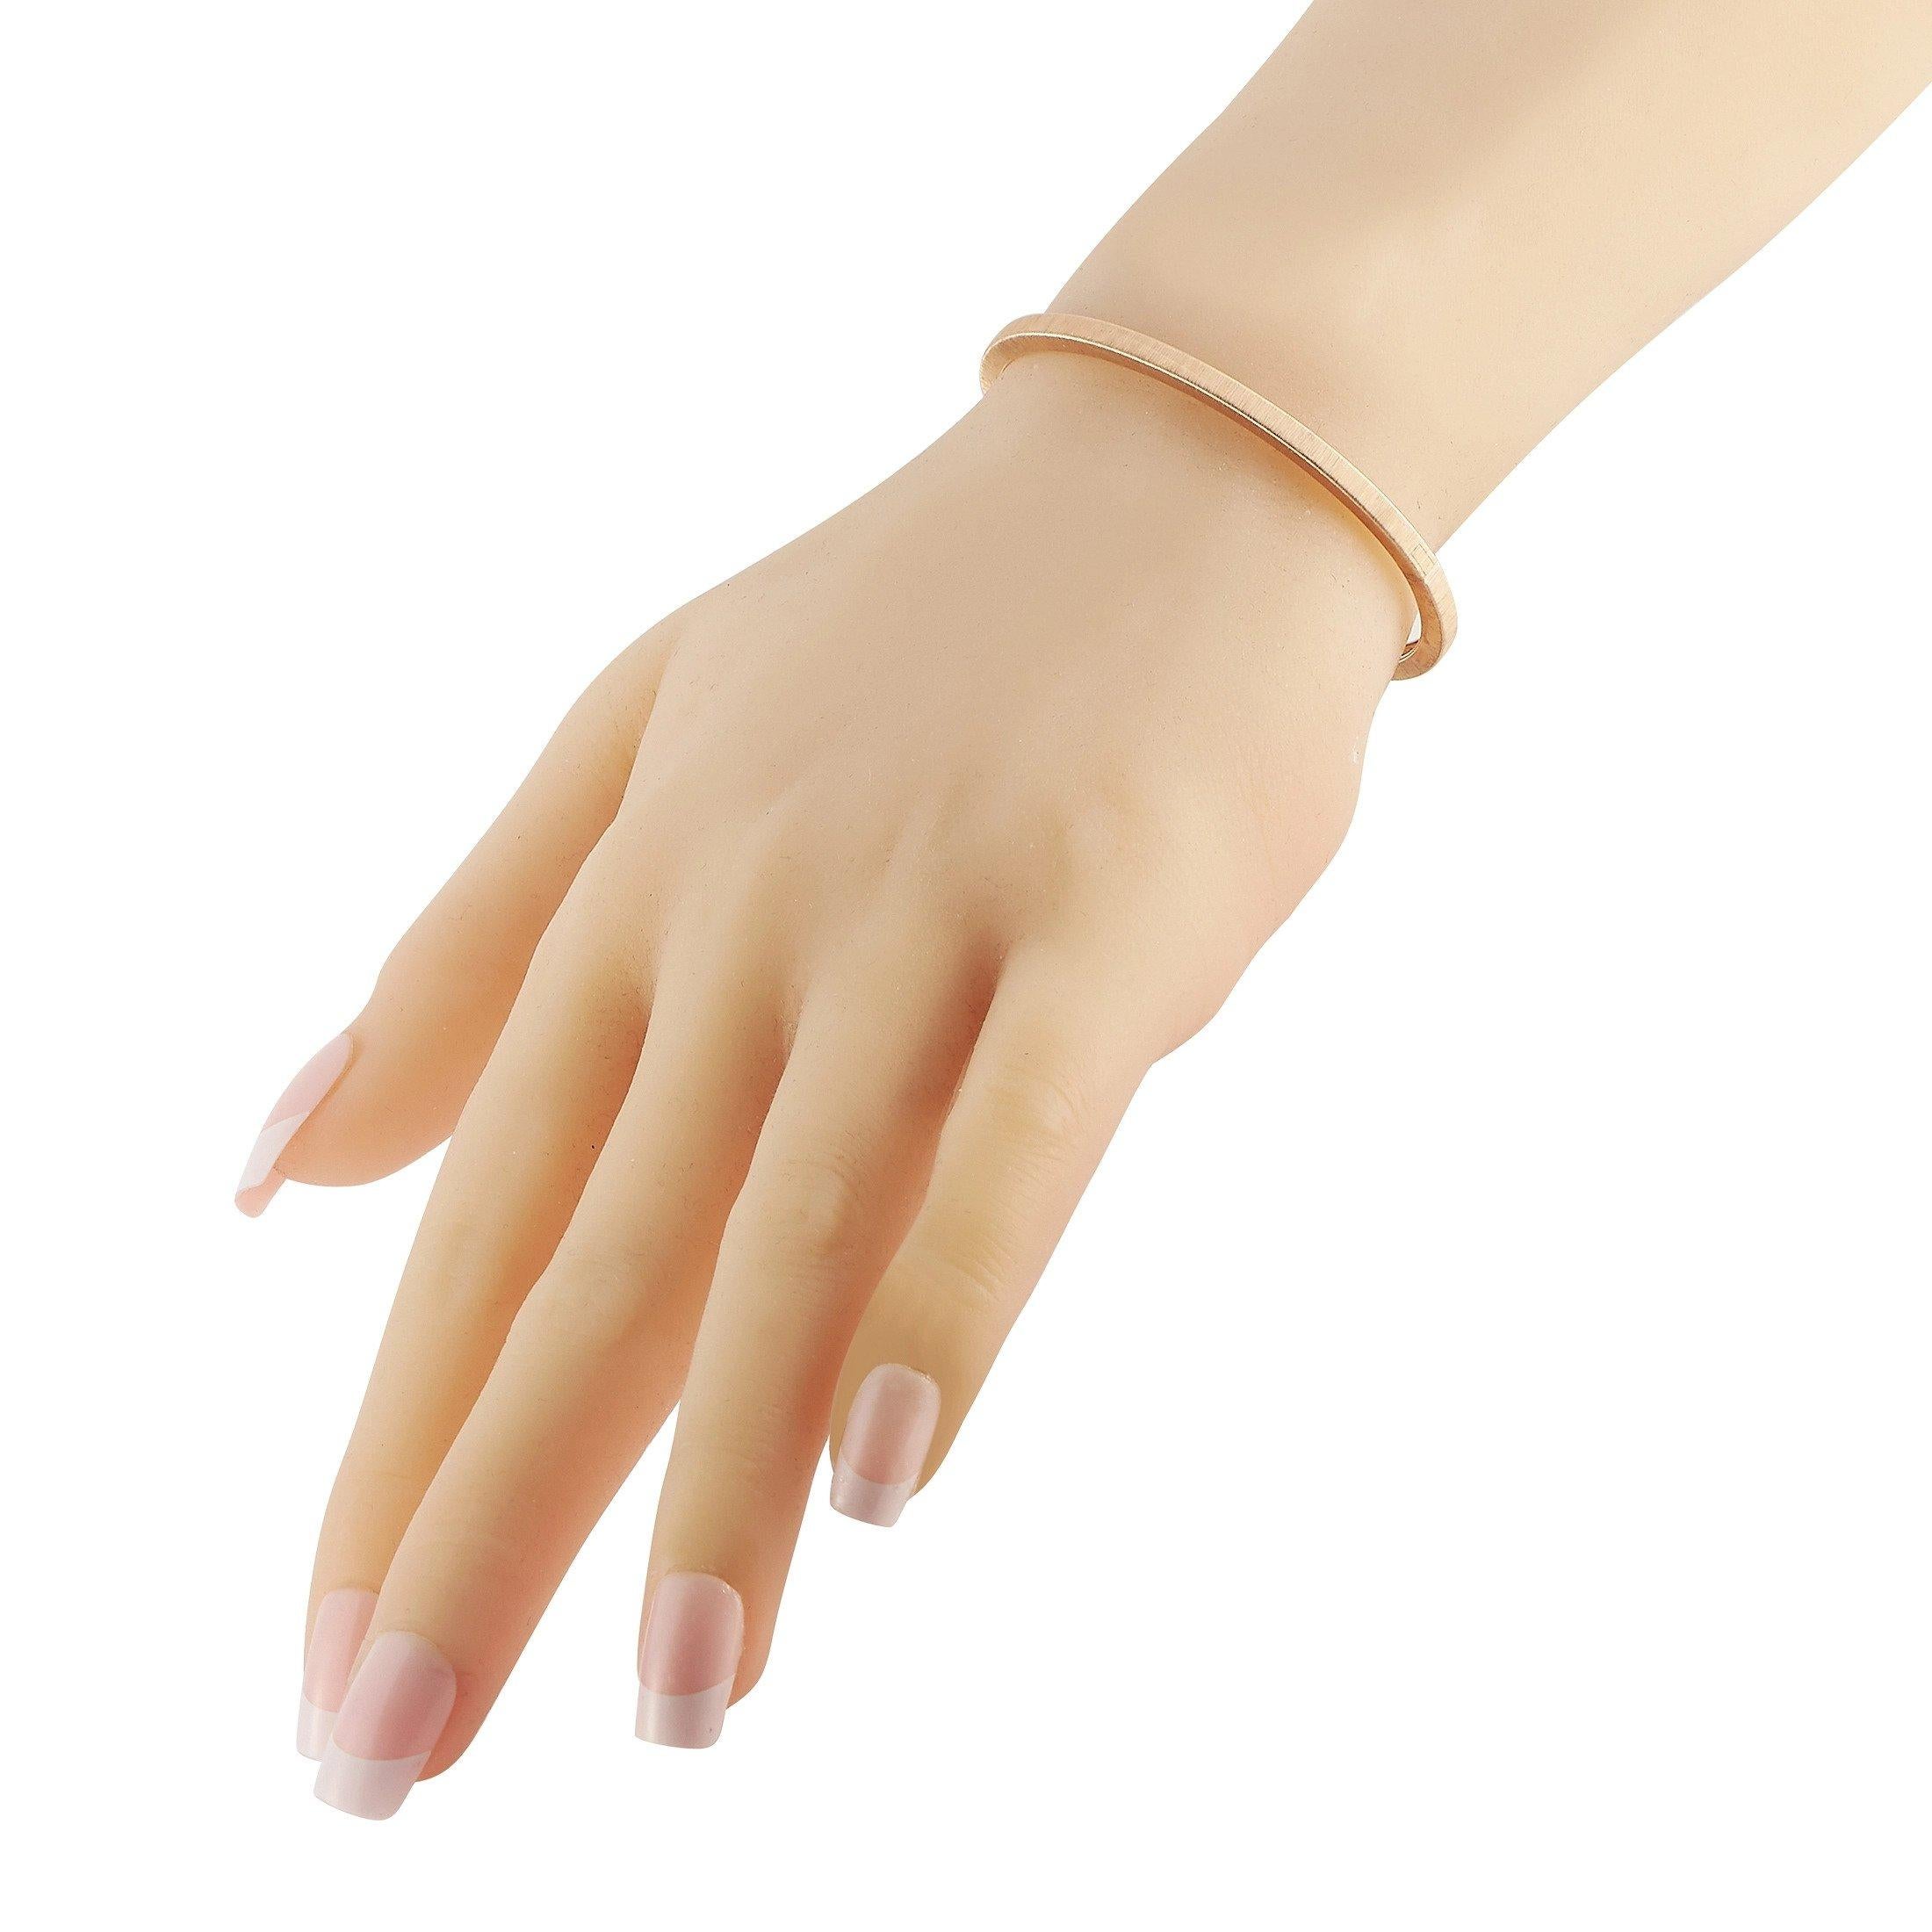 Sleek and simple, this Buccellati bangle, from the Macri collection, is an impeccable piece that is perfect for wear alone or stacked together with other luxury bracelets. Made from 18K Rose Gold, this timeless piece measures 7” long and features a